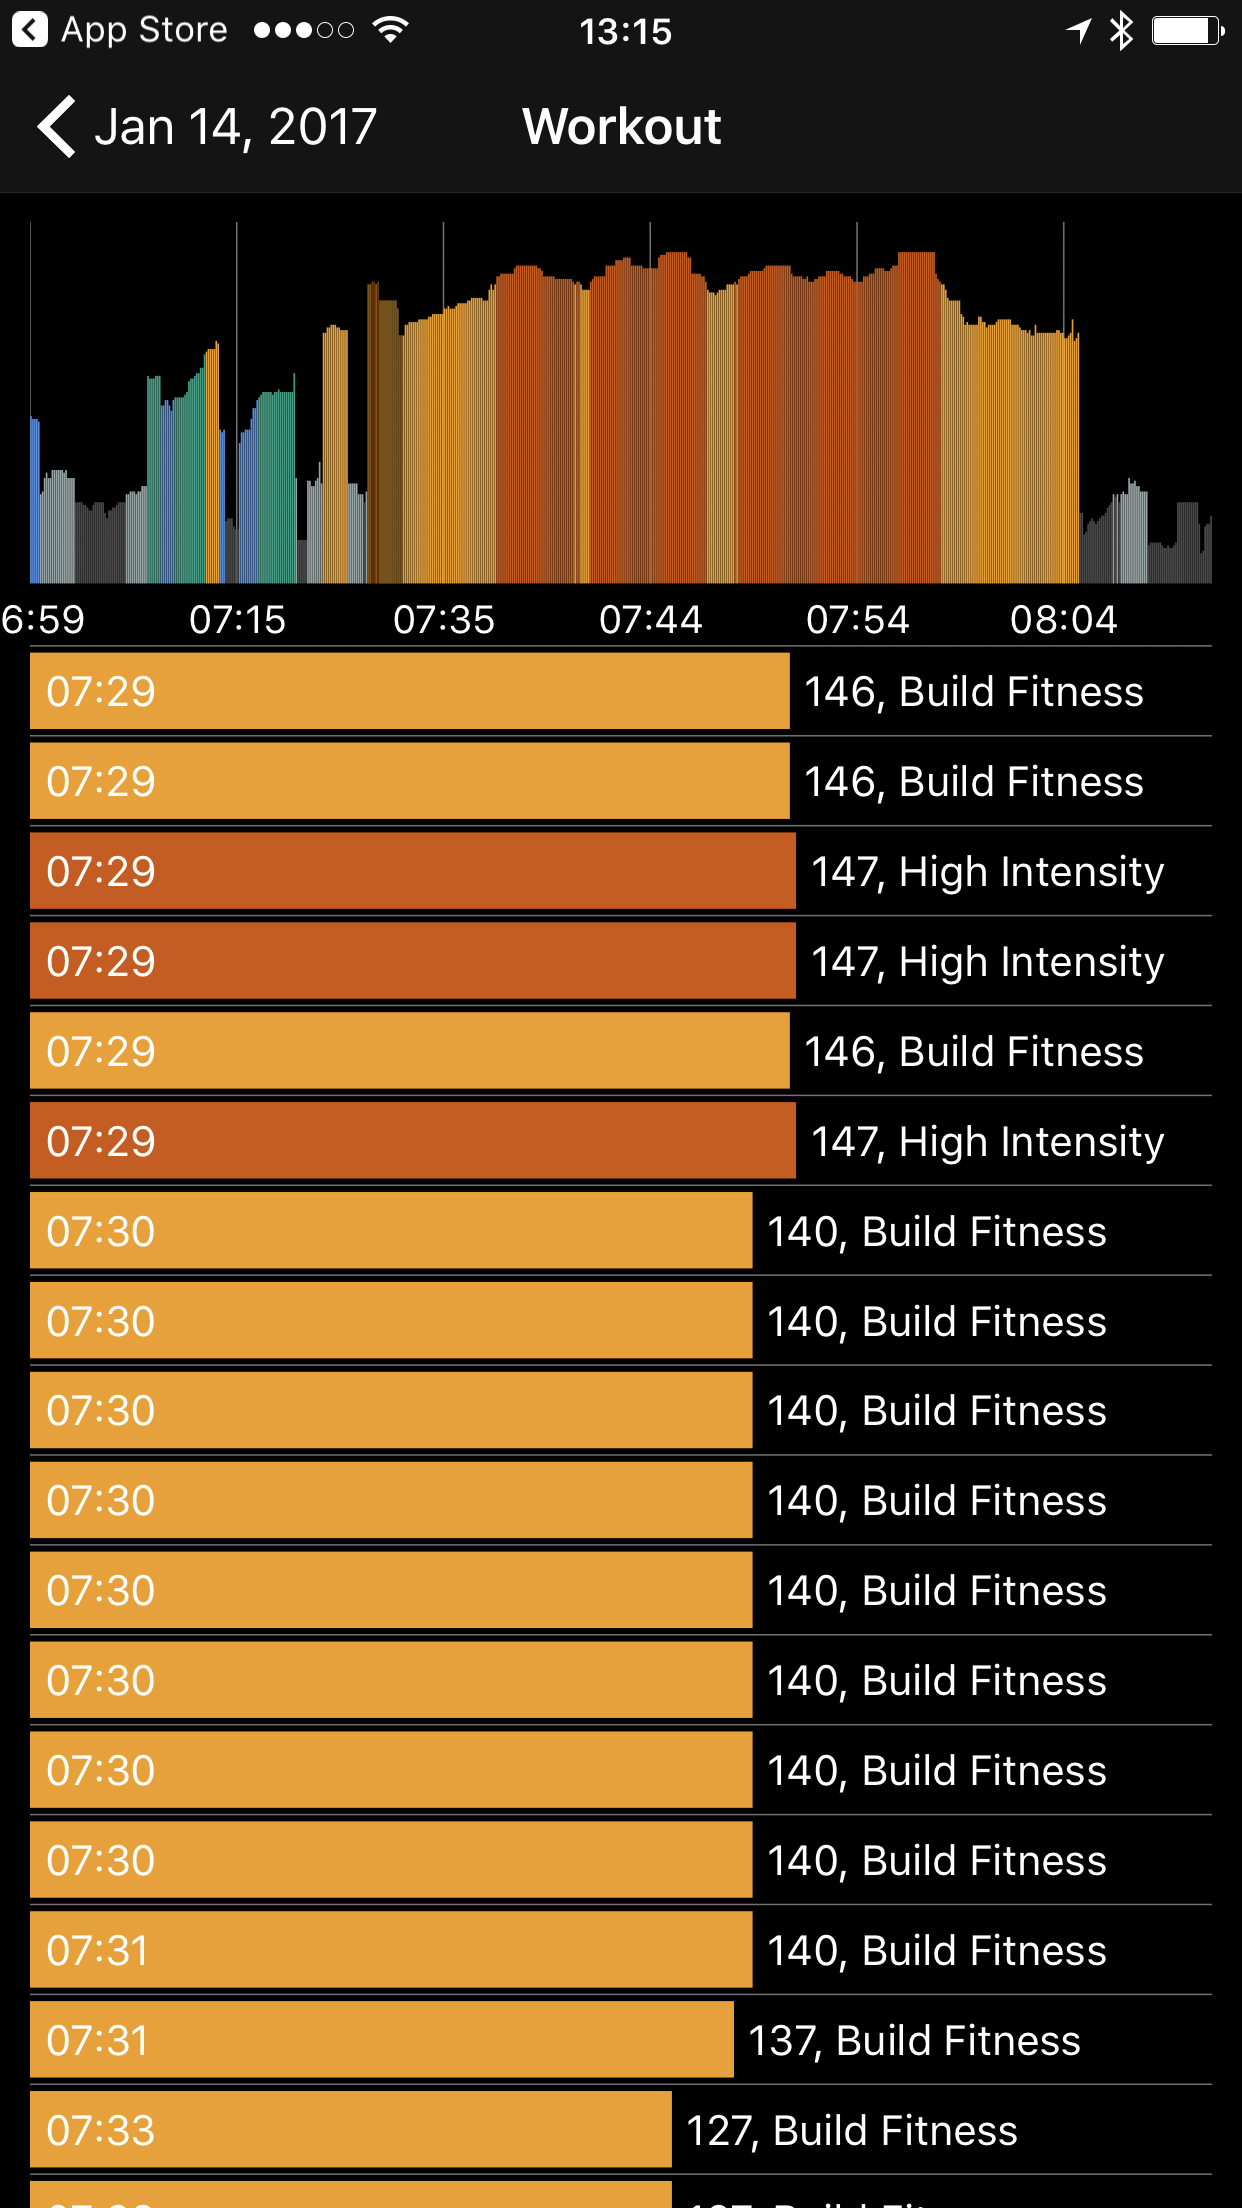 Fat Burning Heart Rate Chart